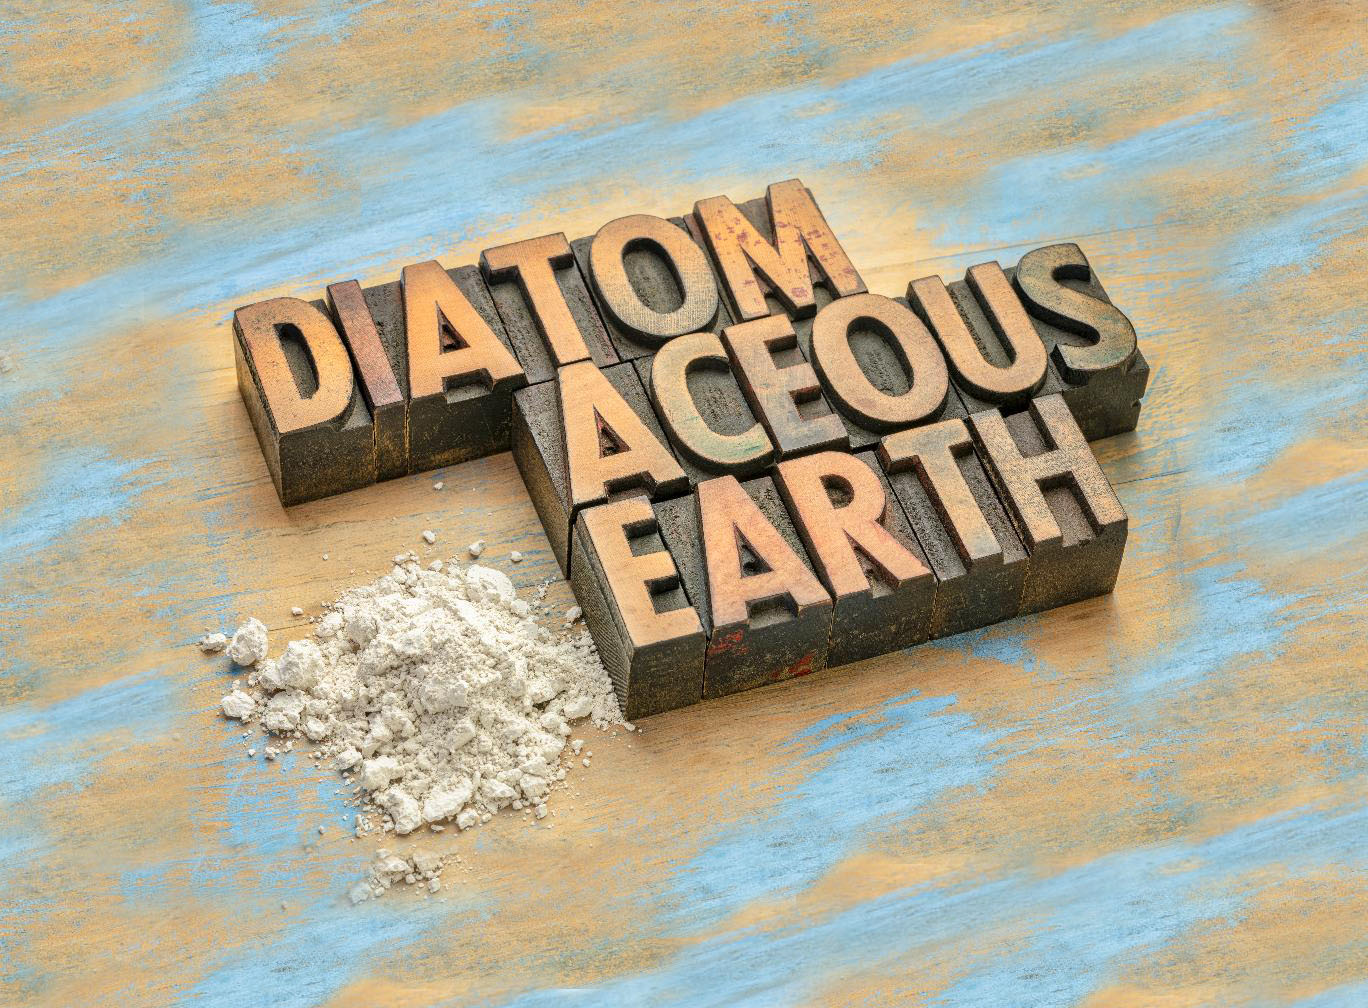 a sign that reads diatomaceous earth next to a pile of diatomaceous earth